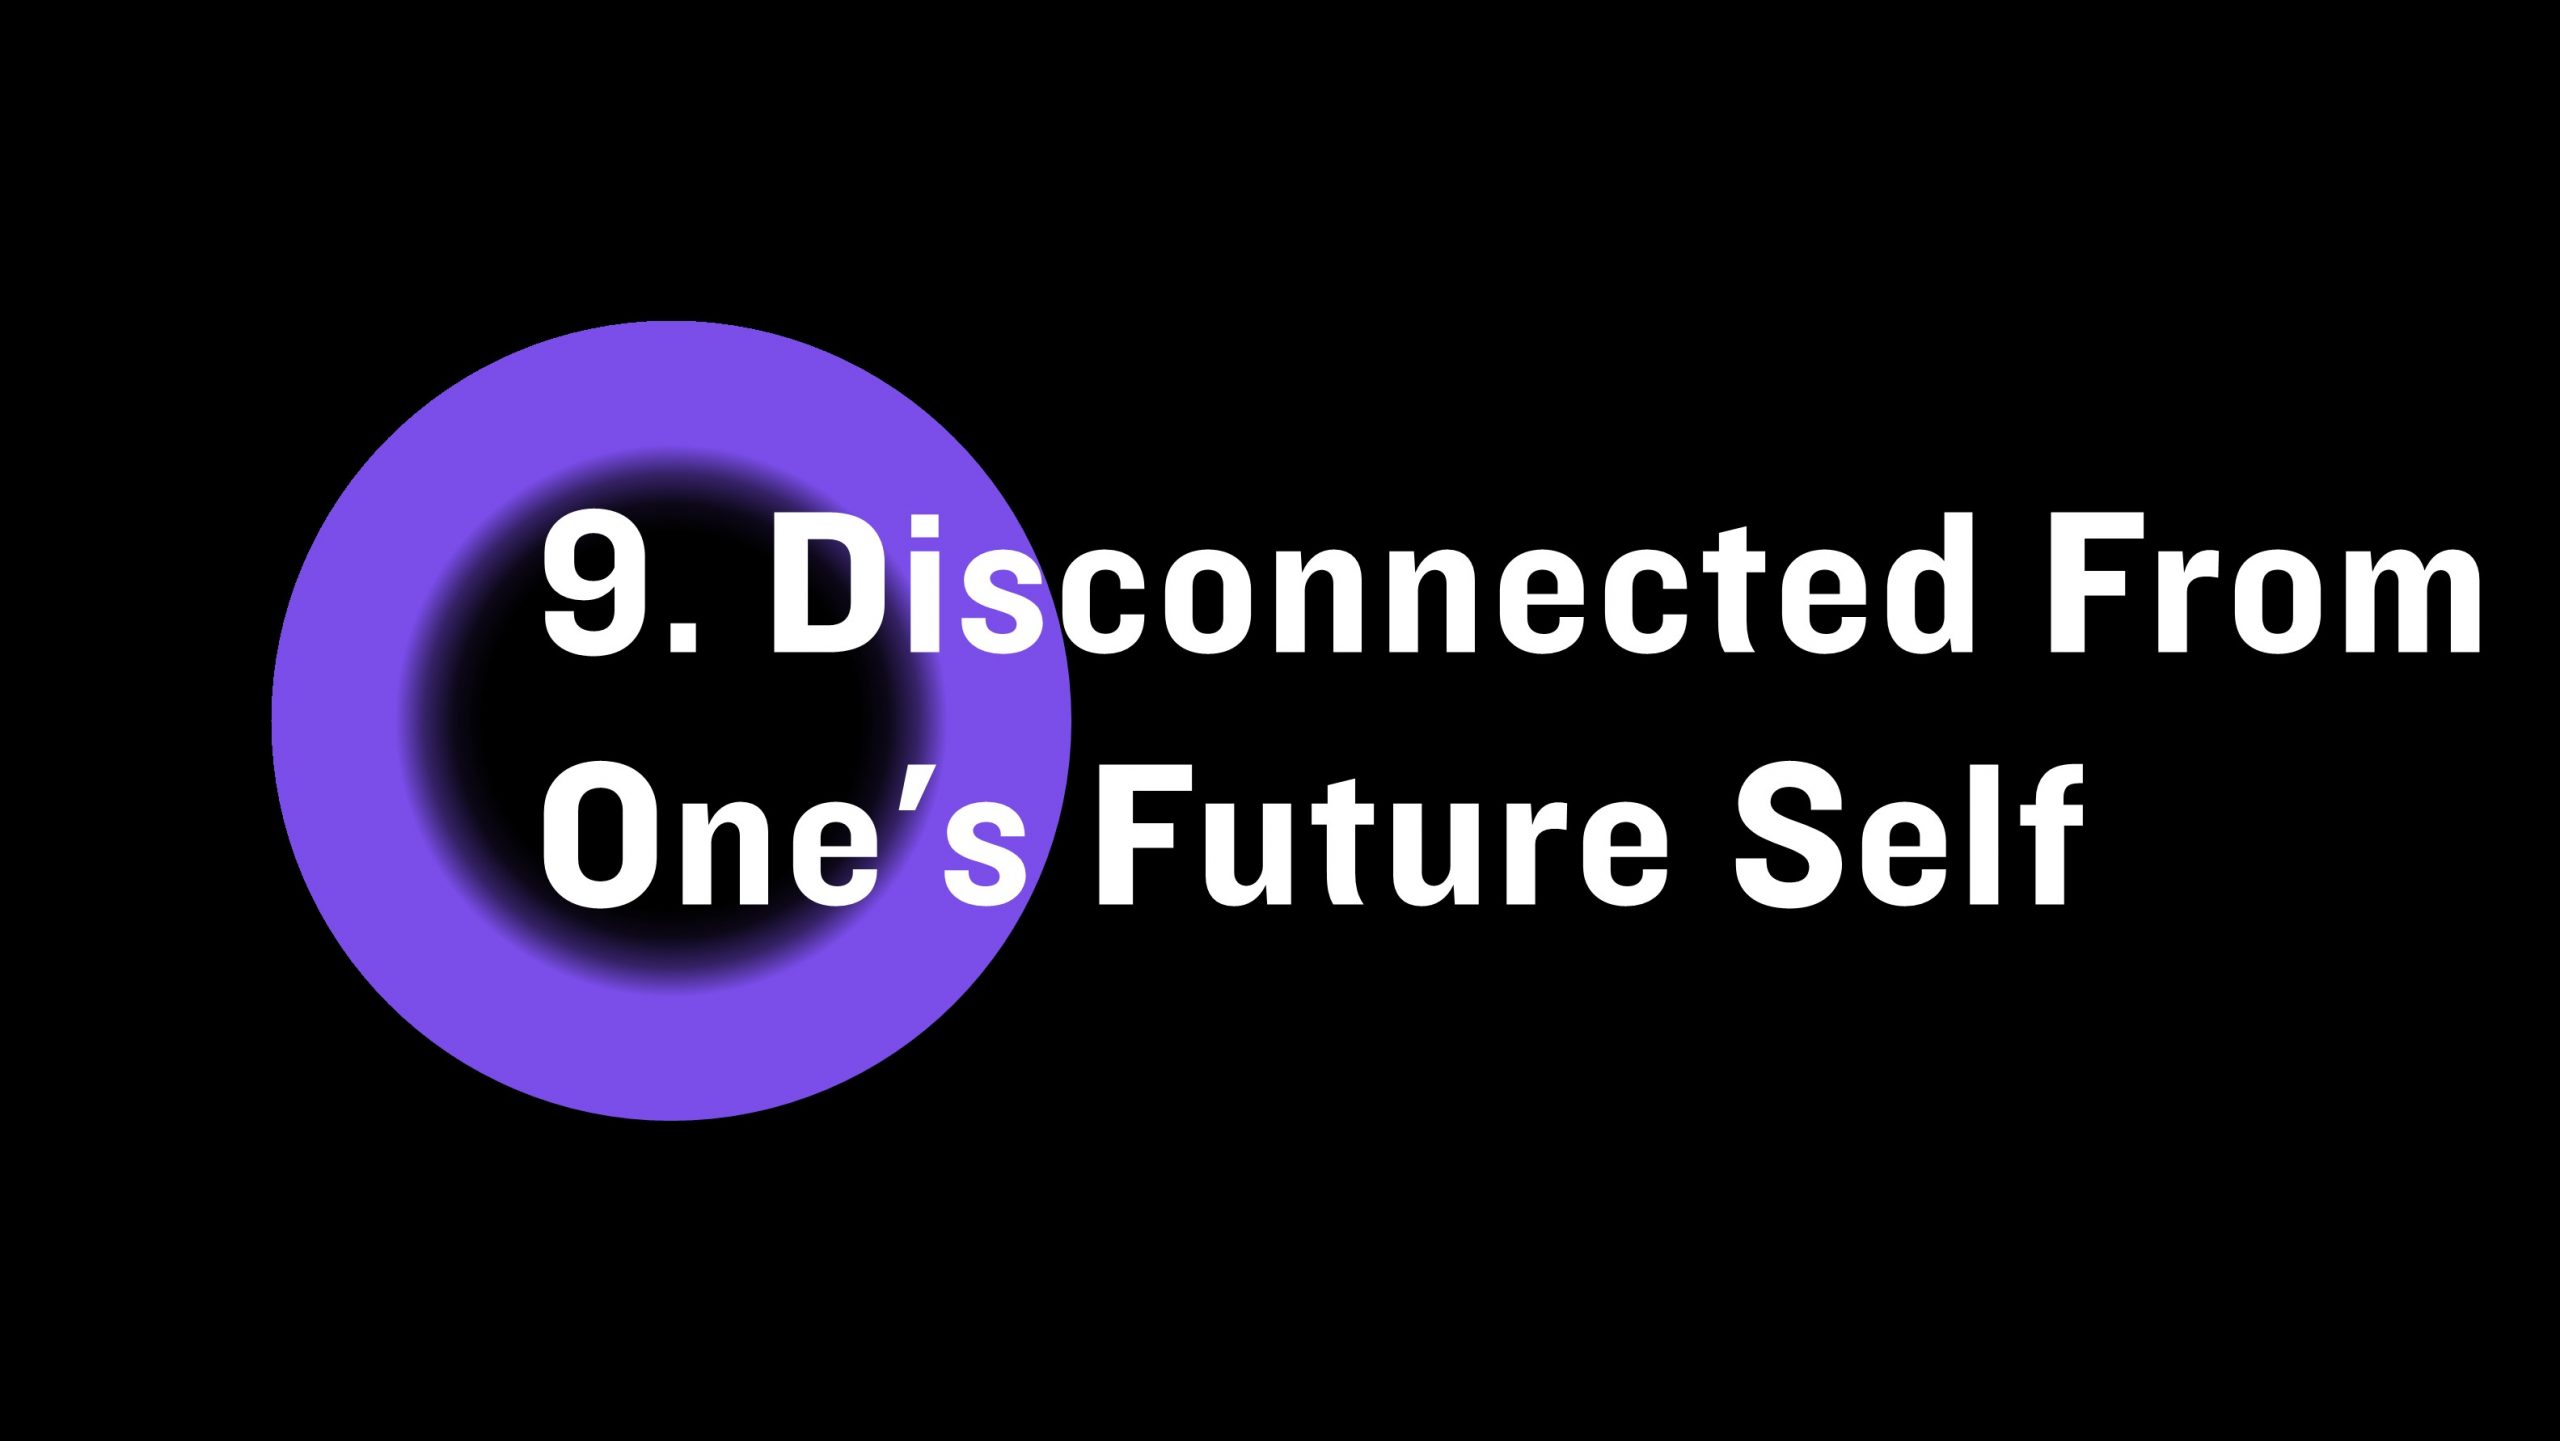 Disconnected from one's future self